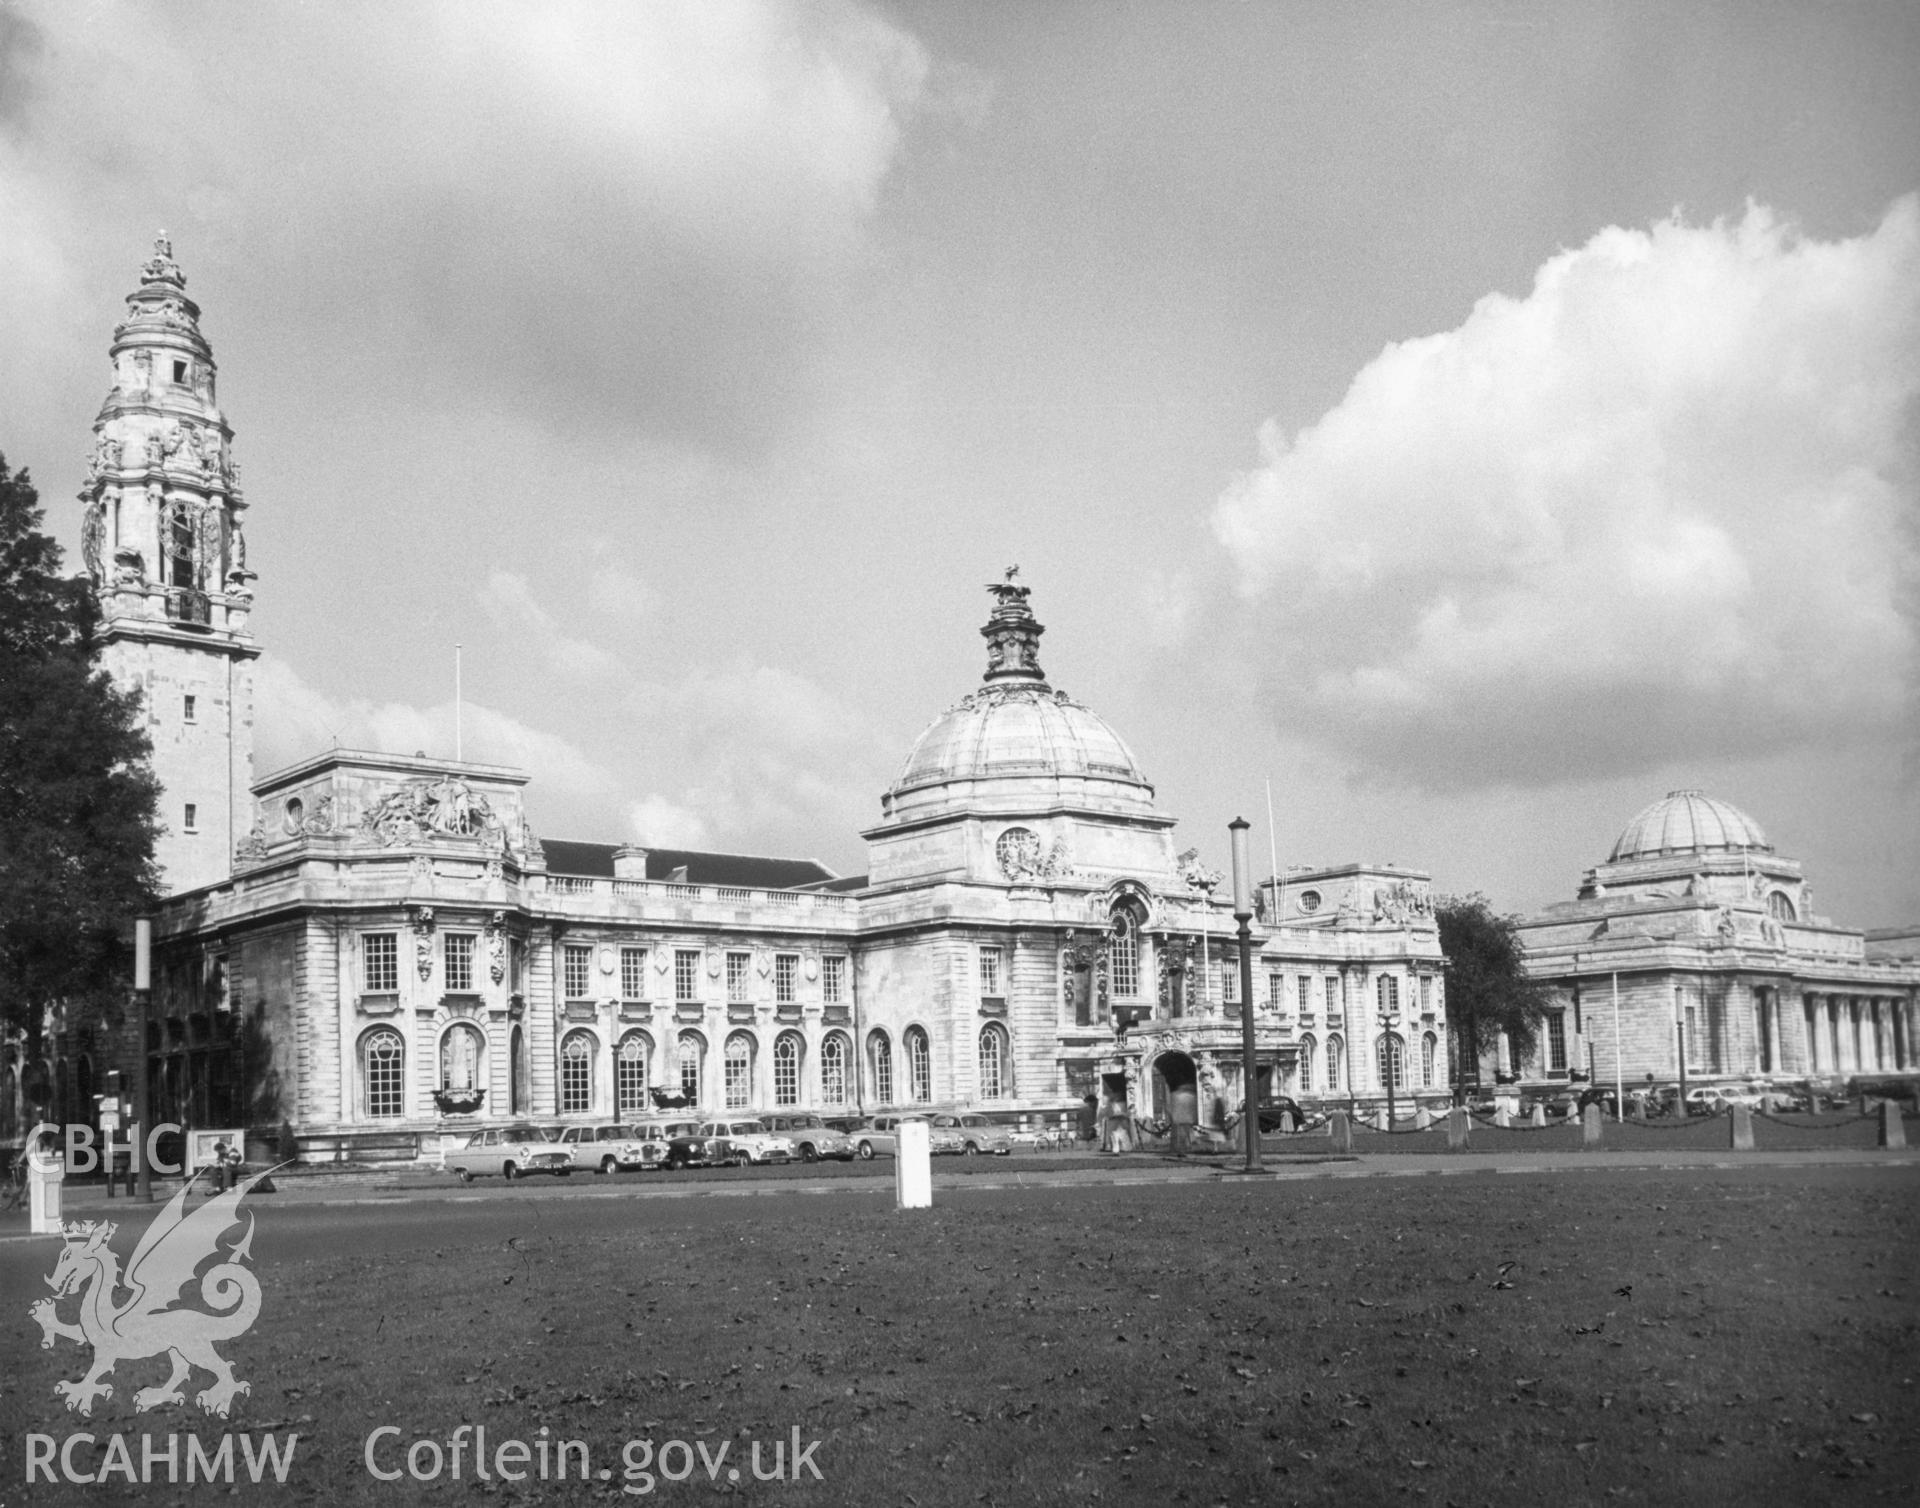 1 b/w print showing  view of Cardiff City Hall; collated by the former Central Office of Information.